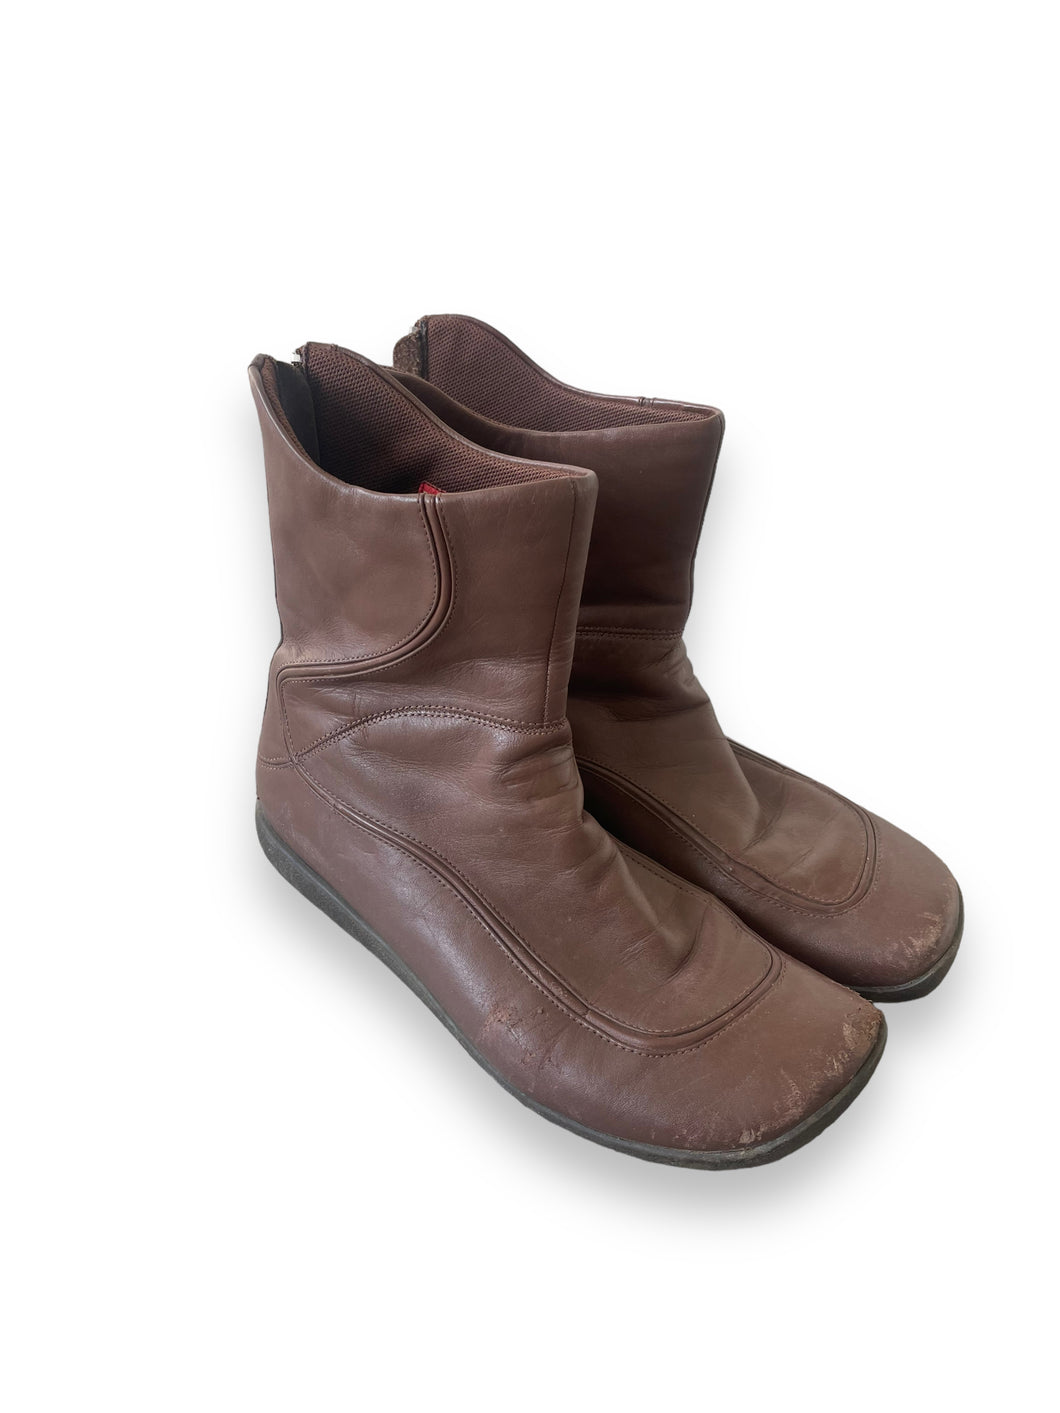 Diesel Leather Camel Boots